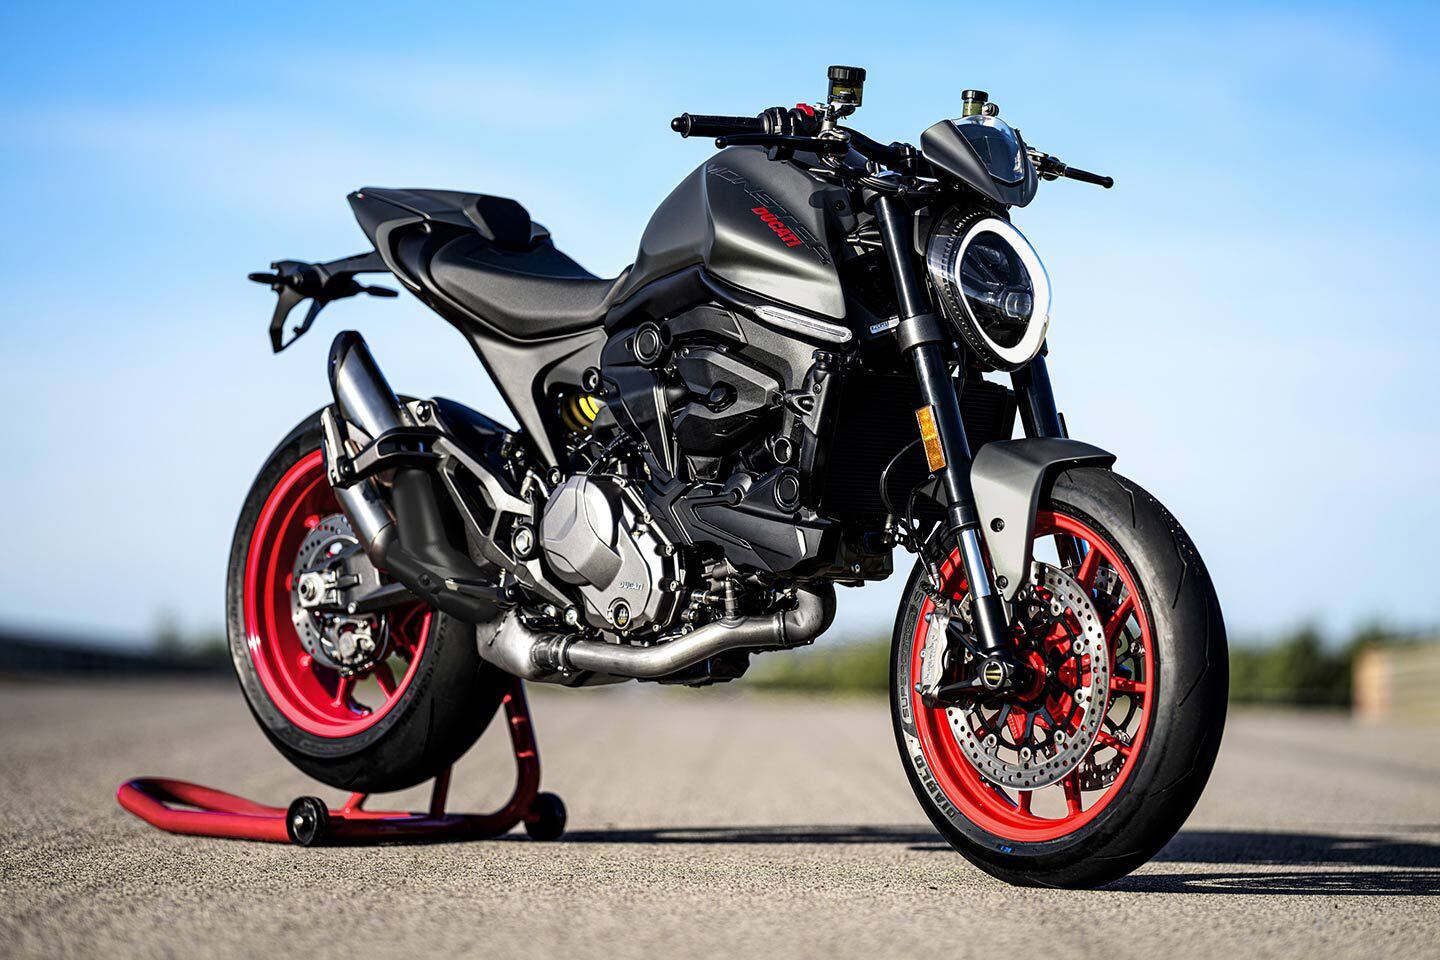 It’s kind of cheating, but once configured with a low seat and low suspension the Ducati Monster+ rings in at 30.5 inches off the tarmac. (2021 model shown.)